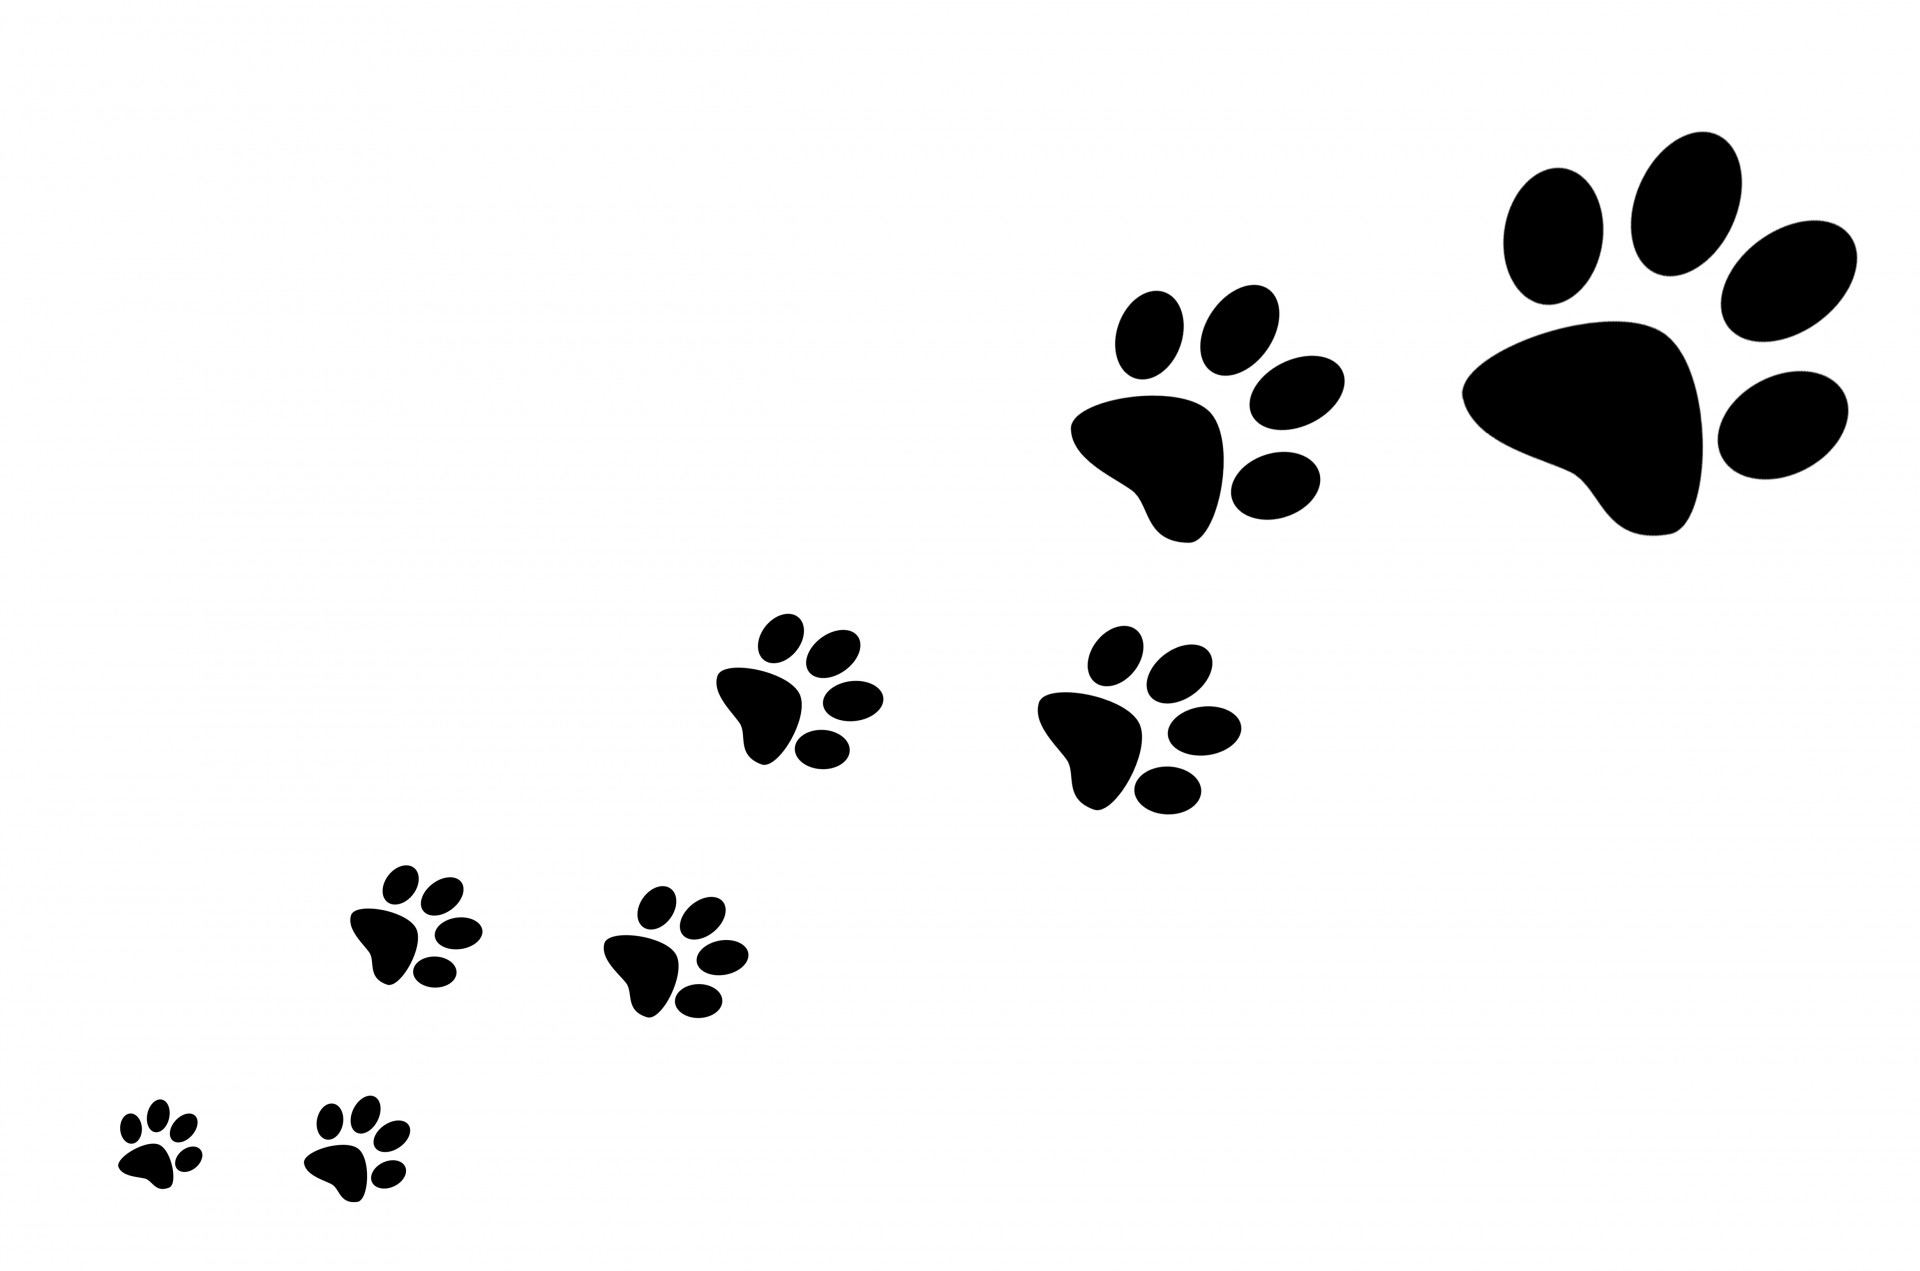 1000+ images about Paw Prints!